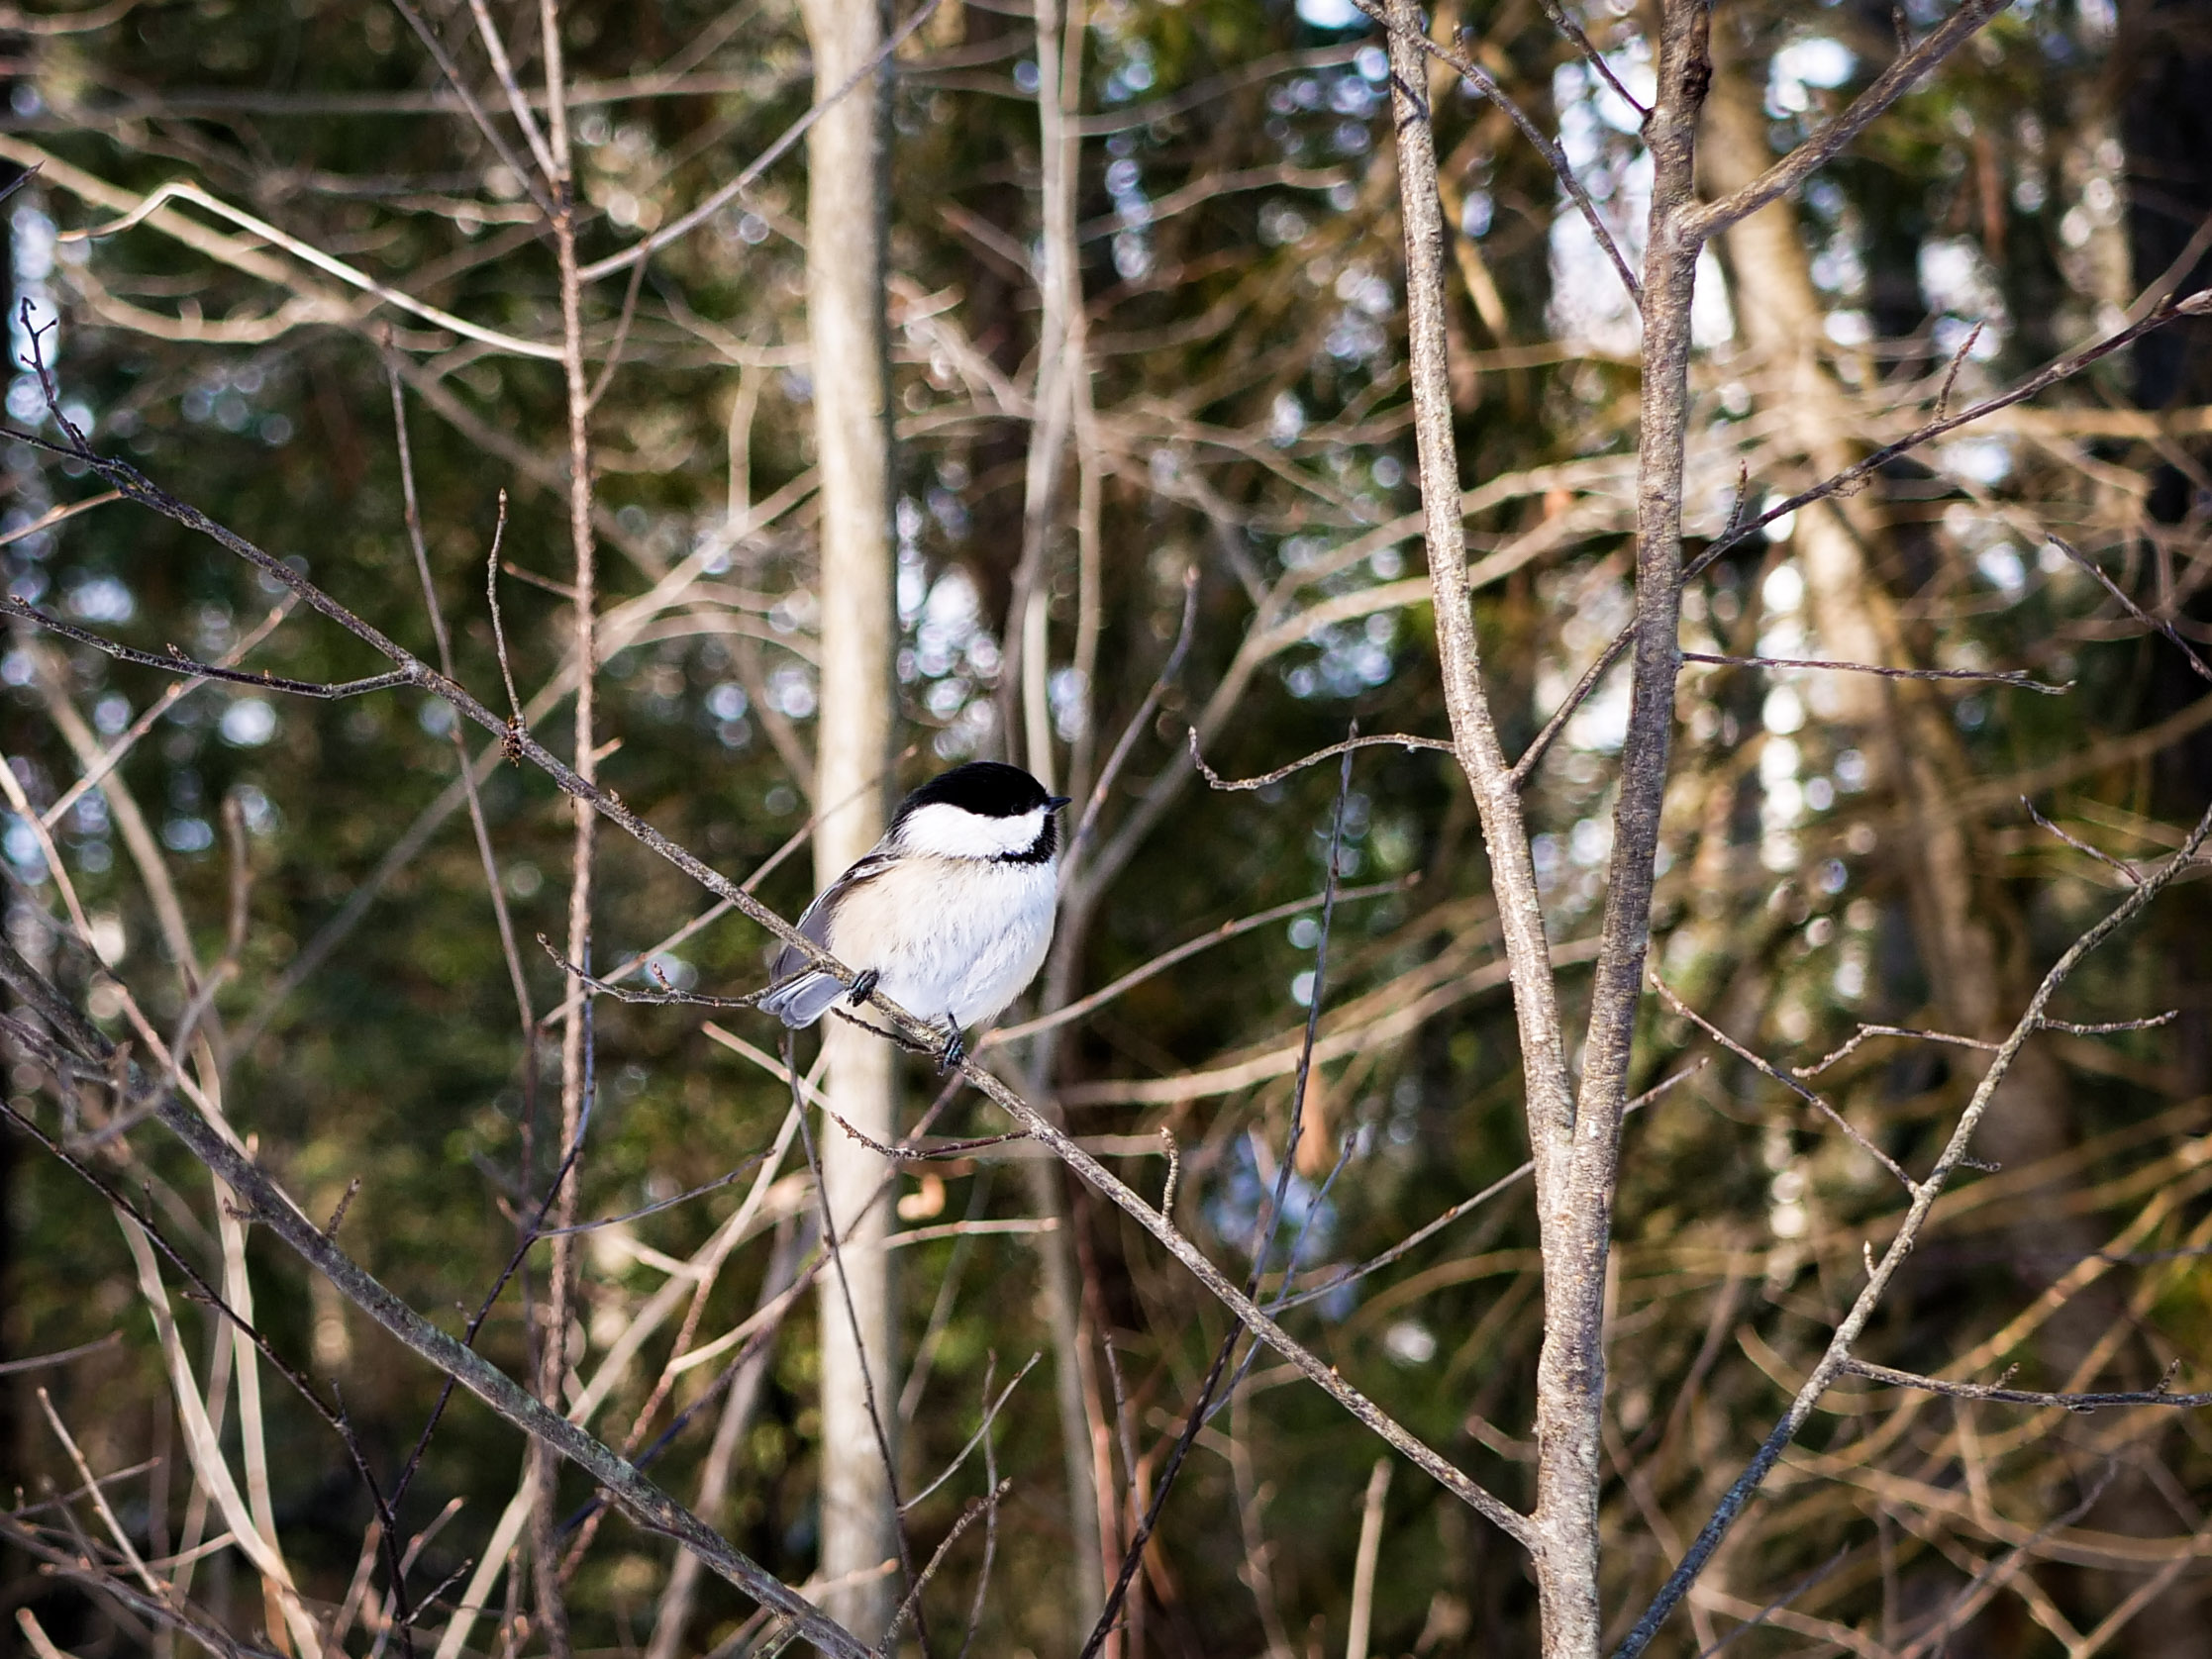 A chickadee perched on a thin branch